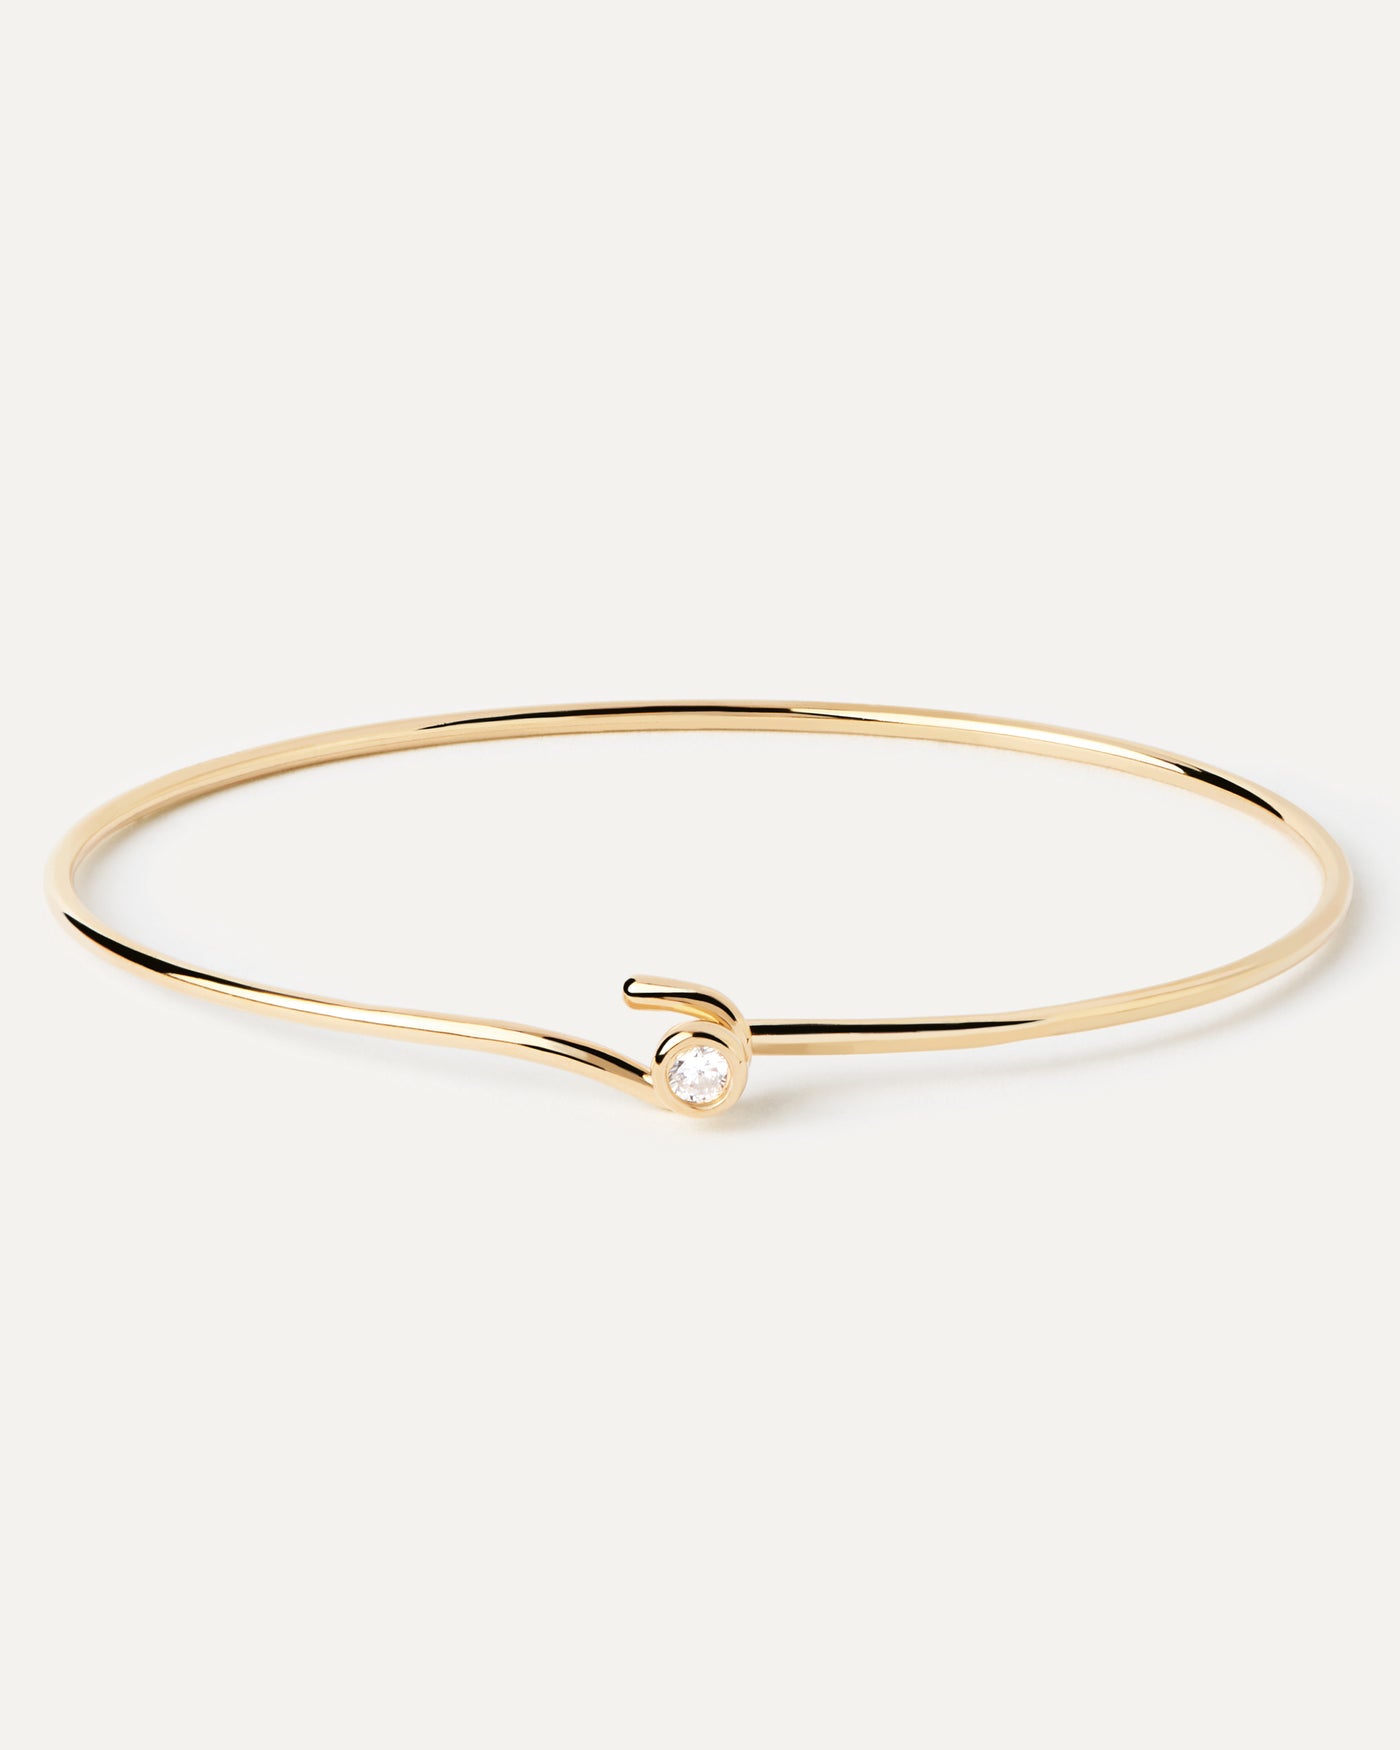 2023 Selection | Siena Bangle. Gold-plated slim hook bangle topped with white zirconia. Get the latest arrival from PDPAOLA. Place your order safely and get this Best Seller. Free Shipping.